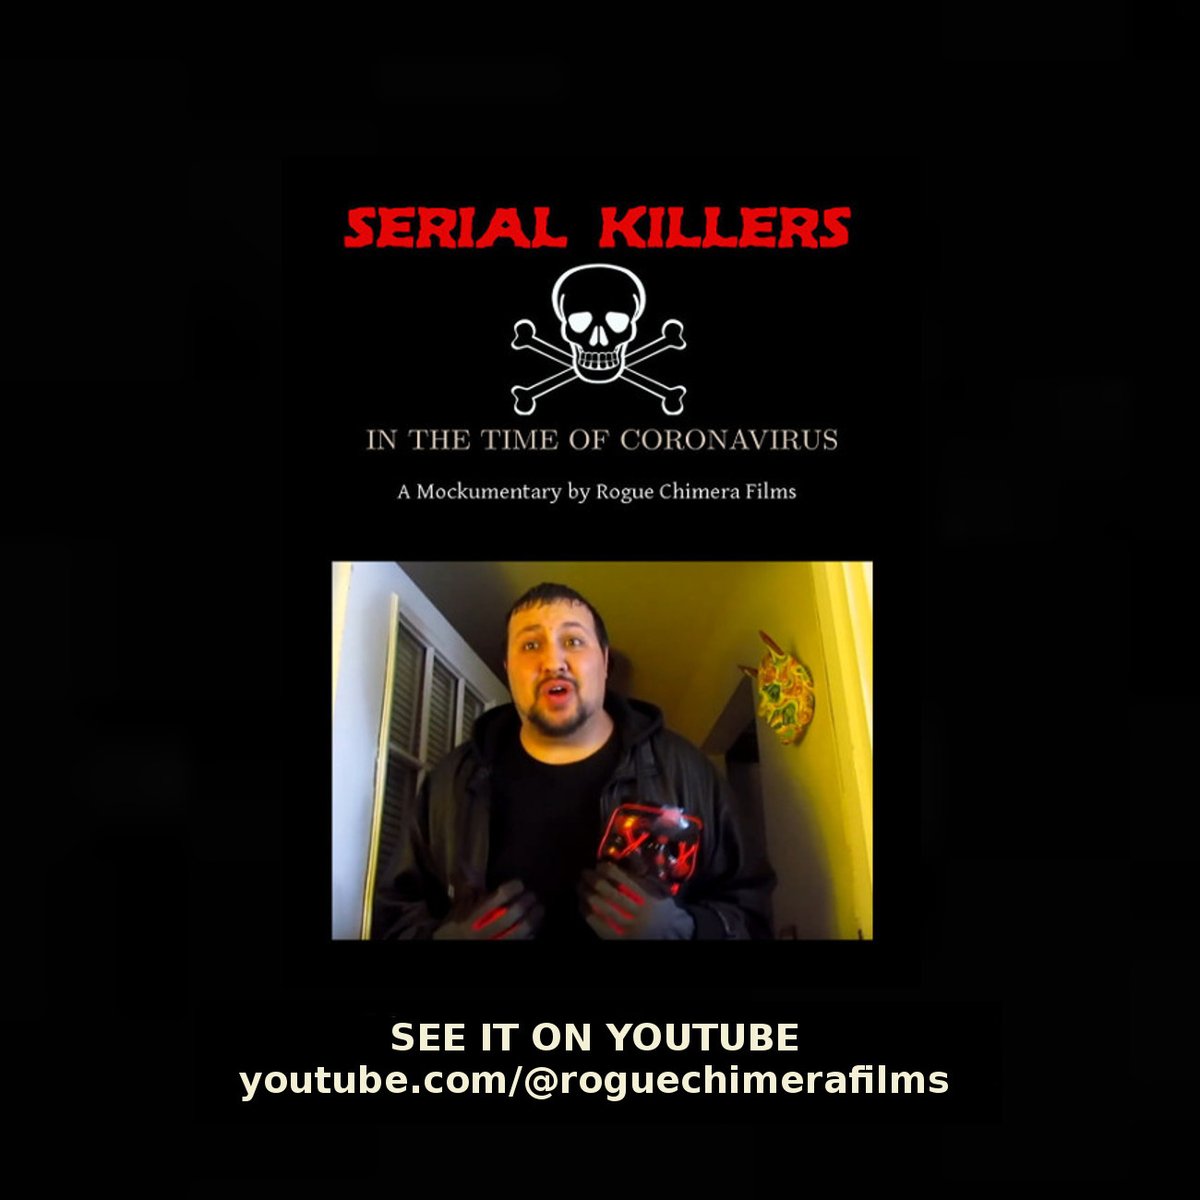 Serial Killers in the Time of Coronavirus Made during the 2020 as a remote film with actors filming themselves. Available for free on YouTube YouTube.com/watch?v=zBnpy6… #rogue #chimera #films #film #movie #movies #horrormovie #horrrormovies #horrorgenre #independentfilm…